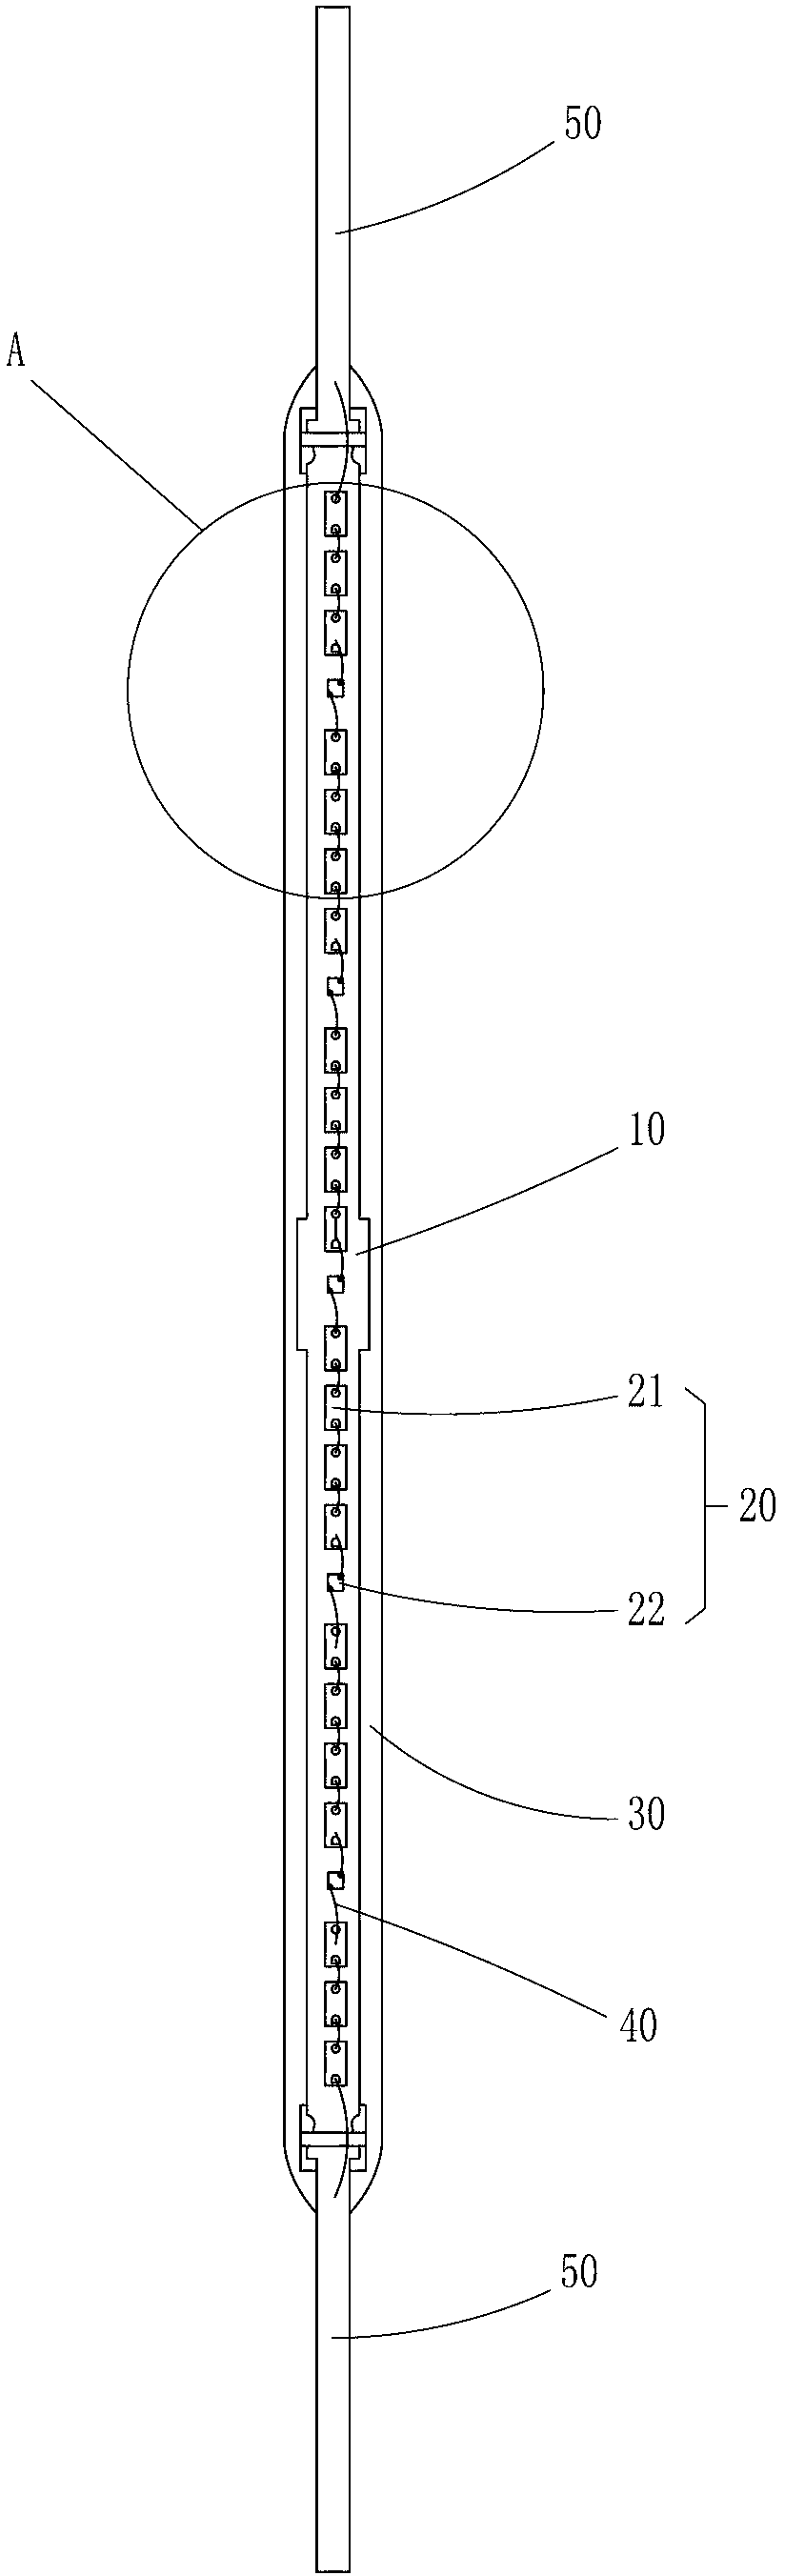 LED (light-emitting diode) lamp and filament thereof